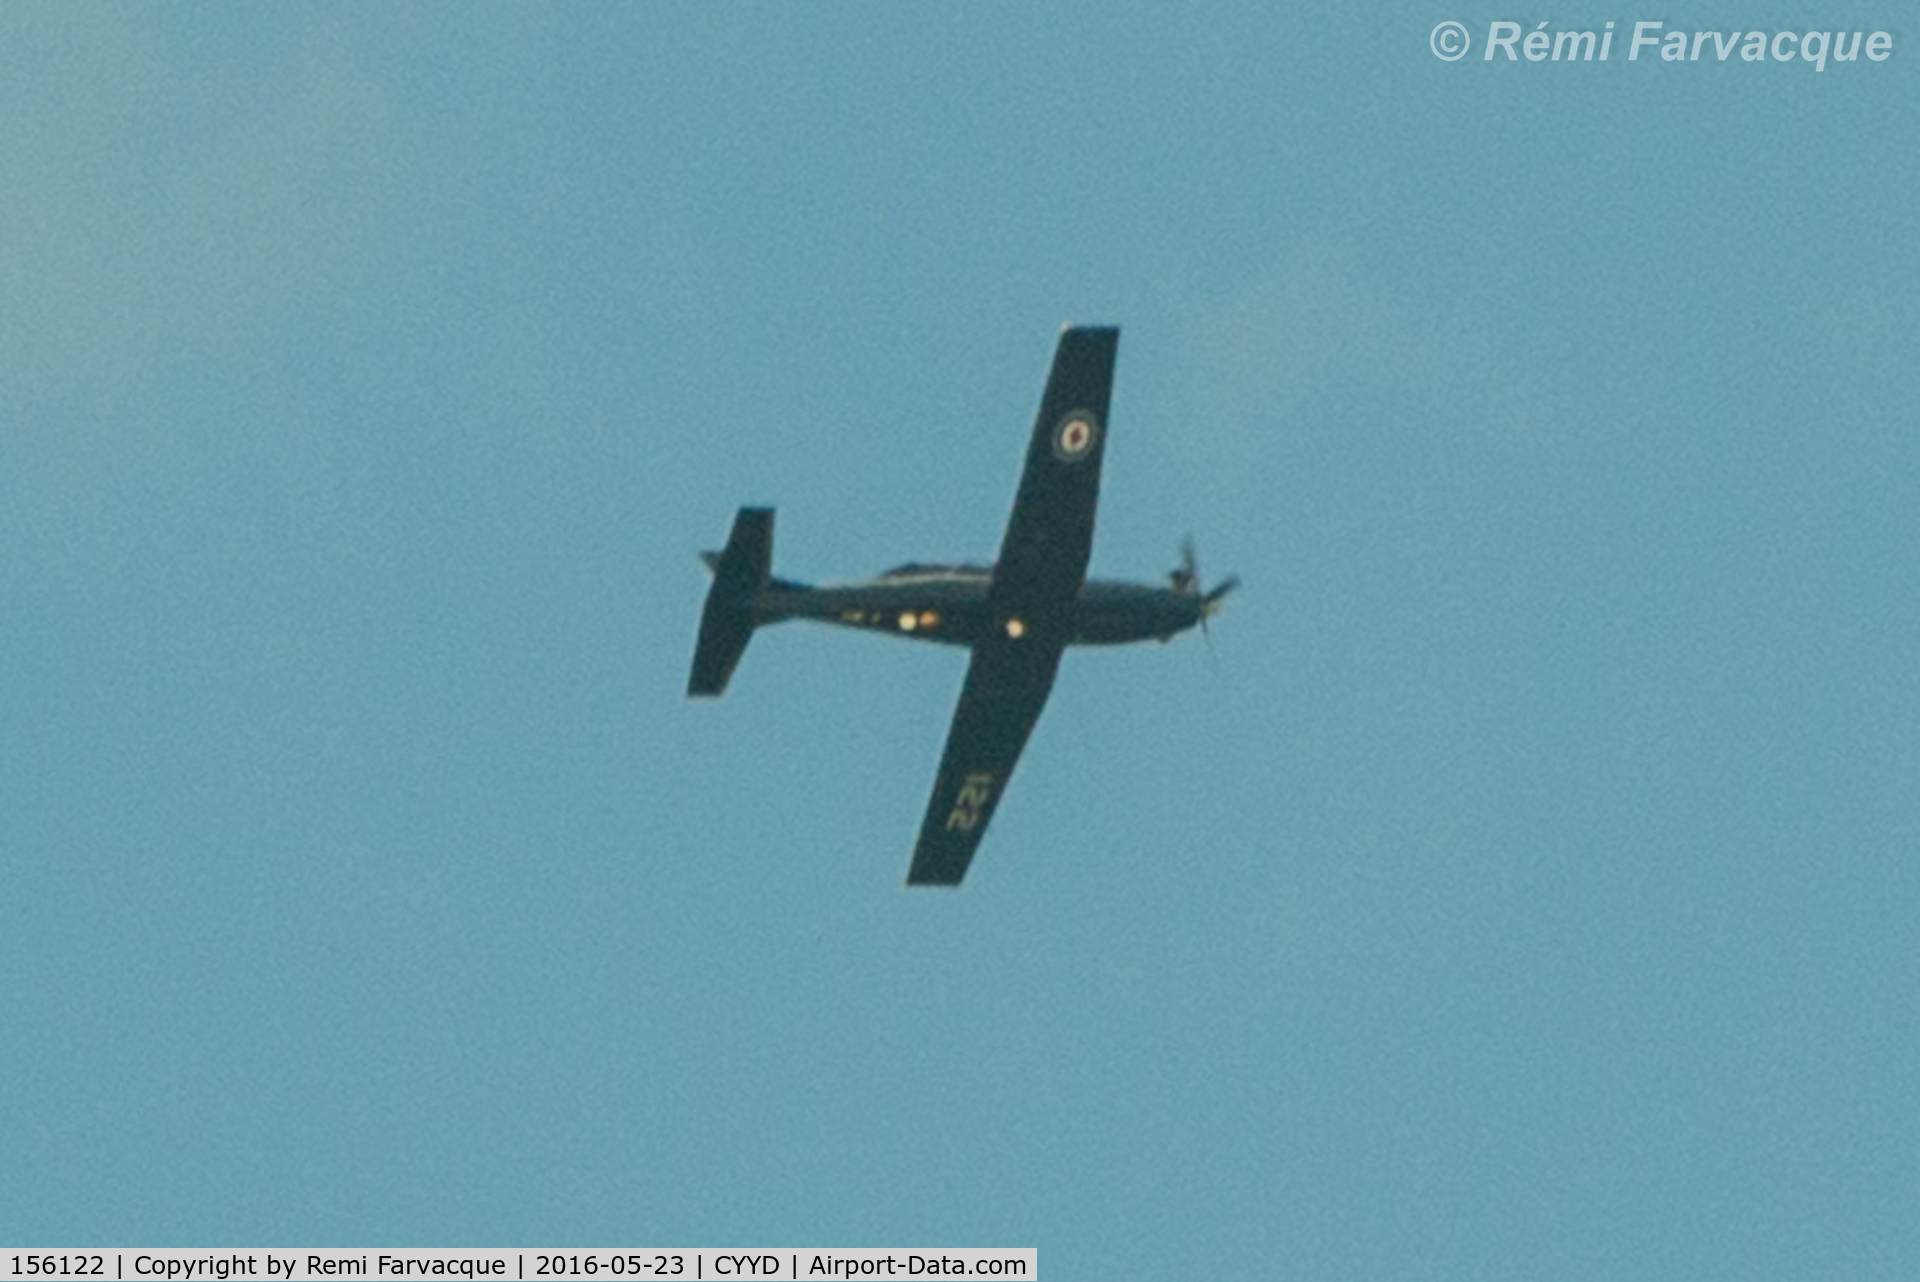 156122, 2000 Raytheon CT-156 Harvard II C/N PF-22, Take-off from Smithers airport (YYD)